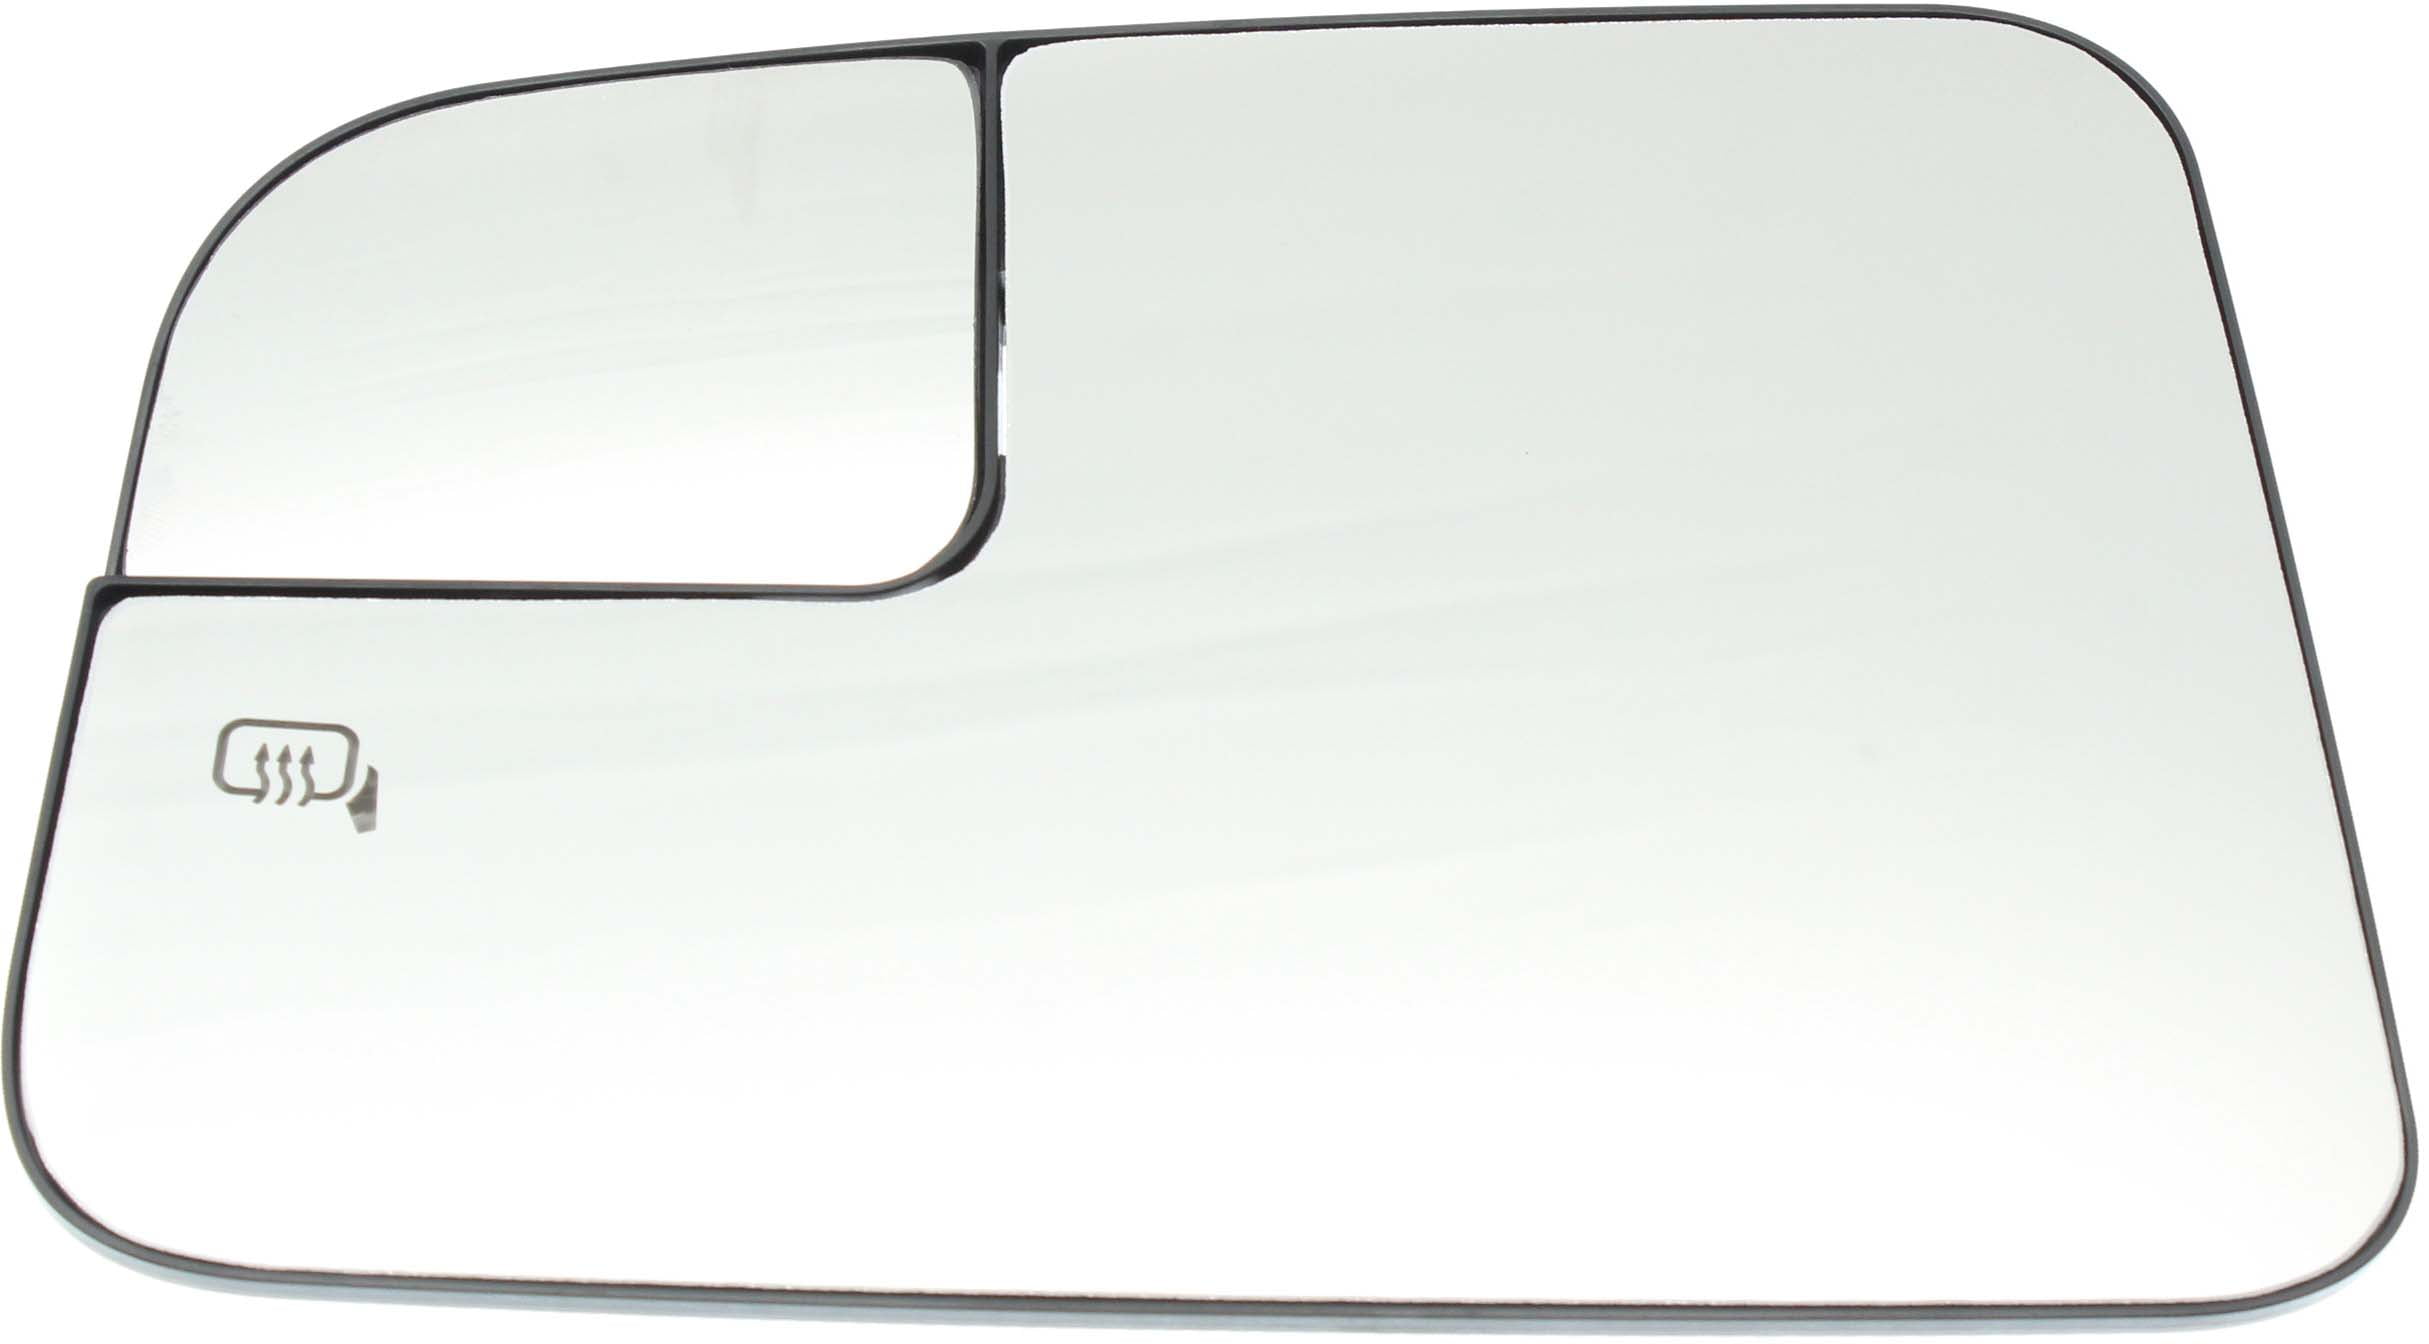 OE Style Passenger Right Side Rear View Mirror Glass Plate Replacement for Ford Edge Lincoln MKX 11-14 